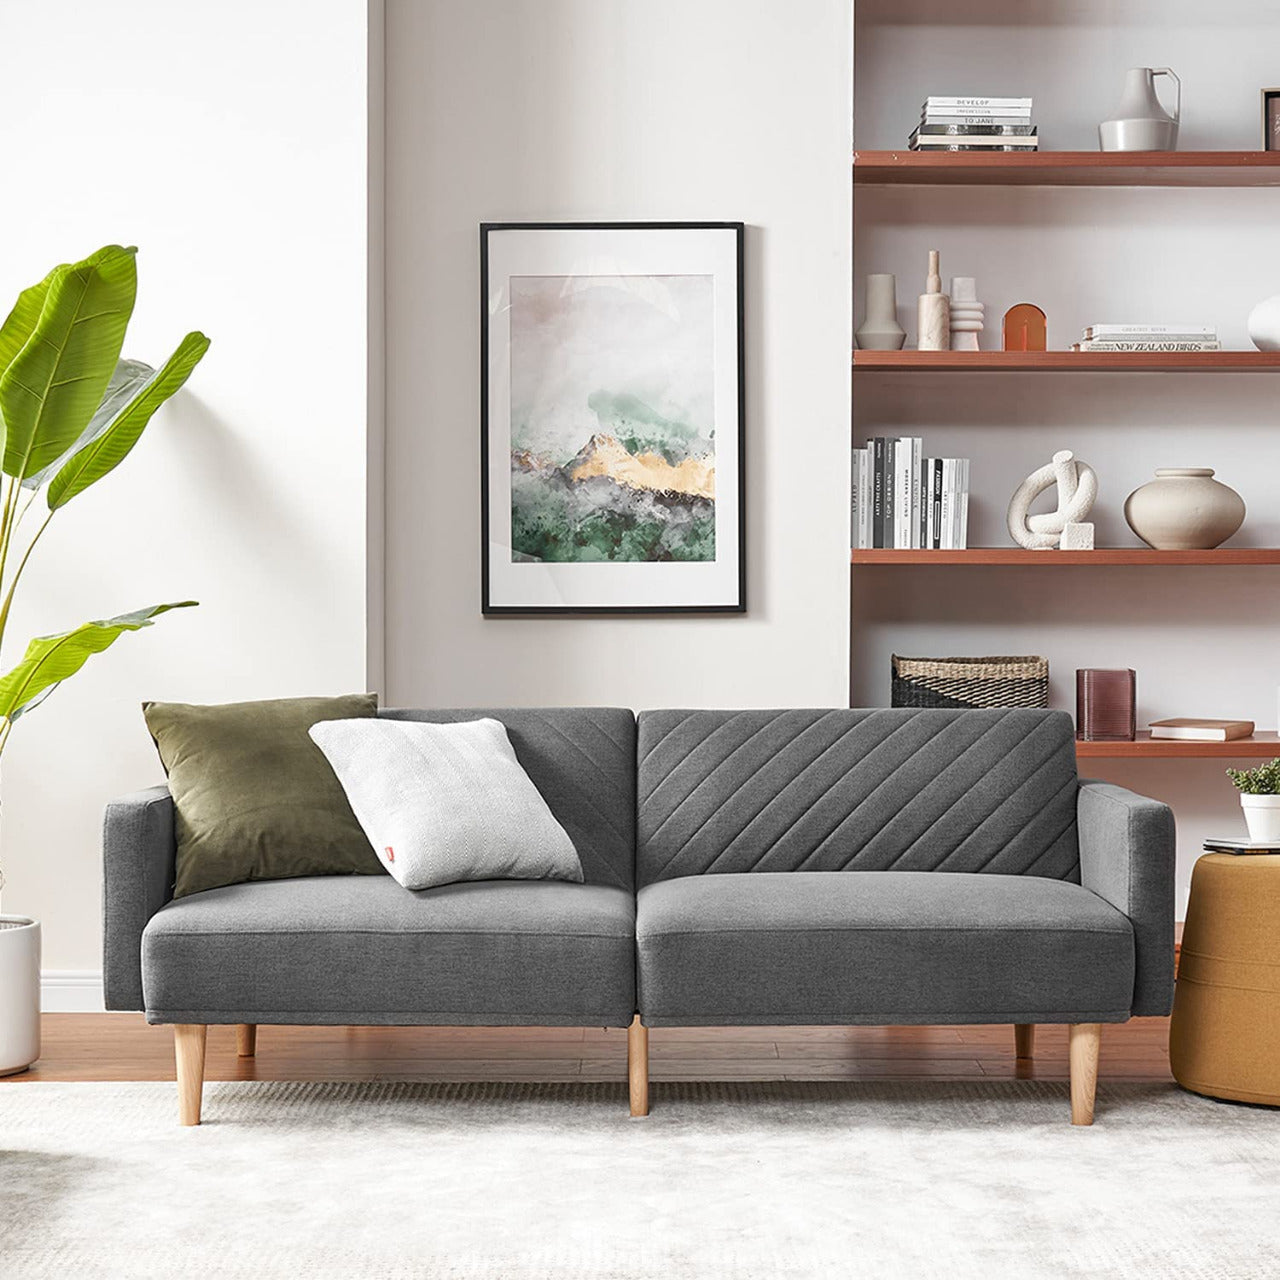 2 Seater Small RIO Sofa for Living Room